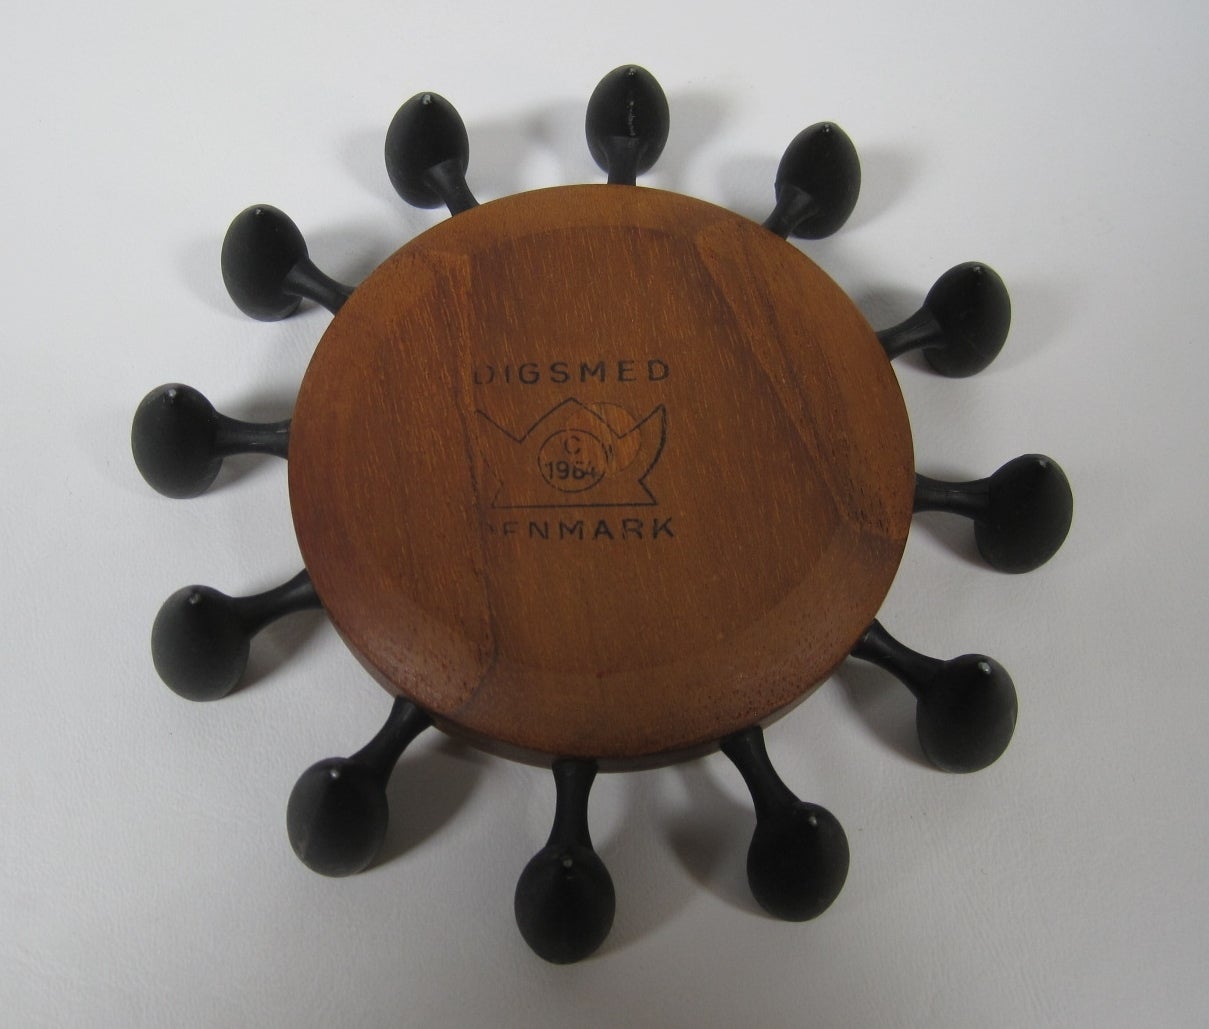 Danish teak Mid-Century Modern candleholder by Digsmed.
Teakwood and torpedo shaped cast iron candlesticks which holds 12 candles.

Free shipping within the United States and Canada.